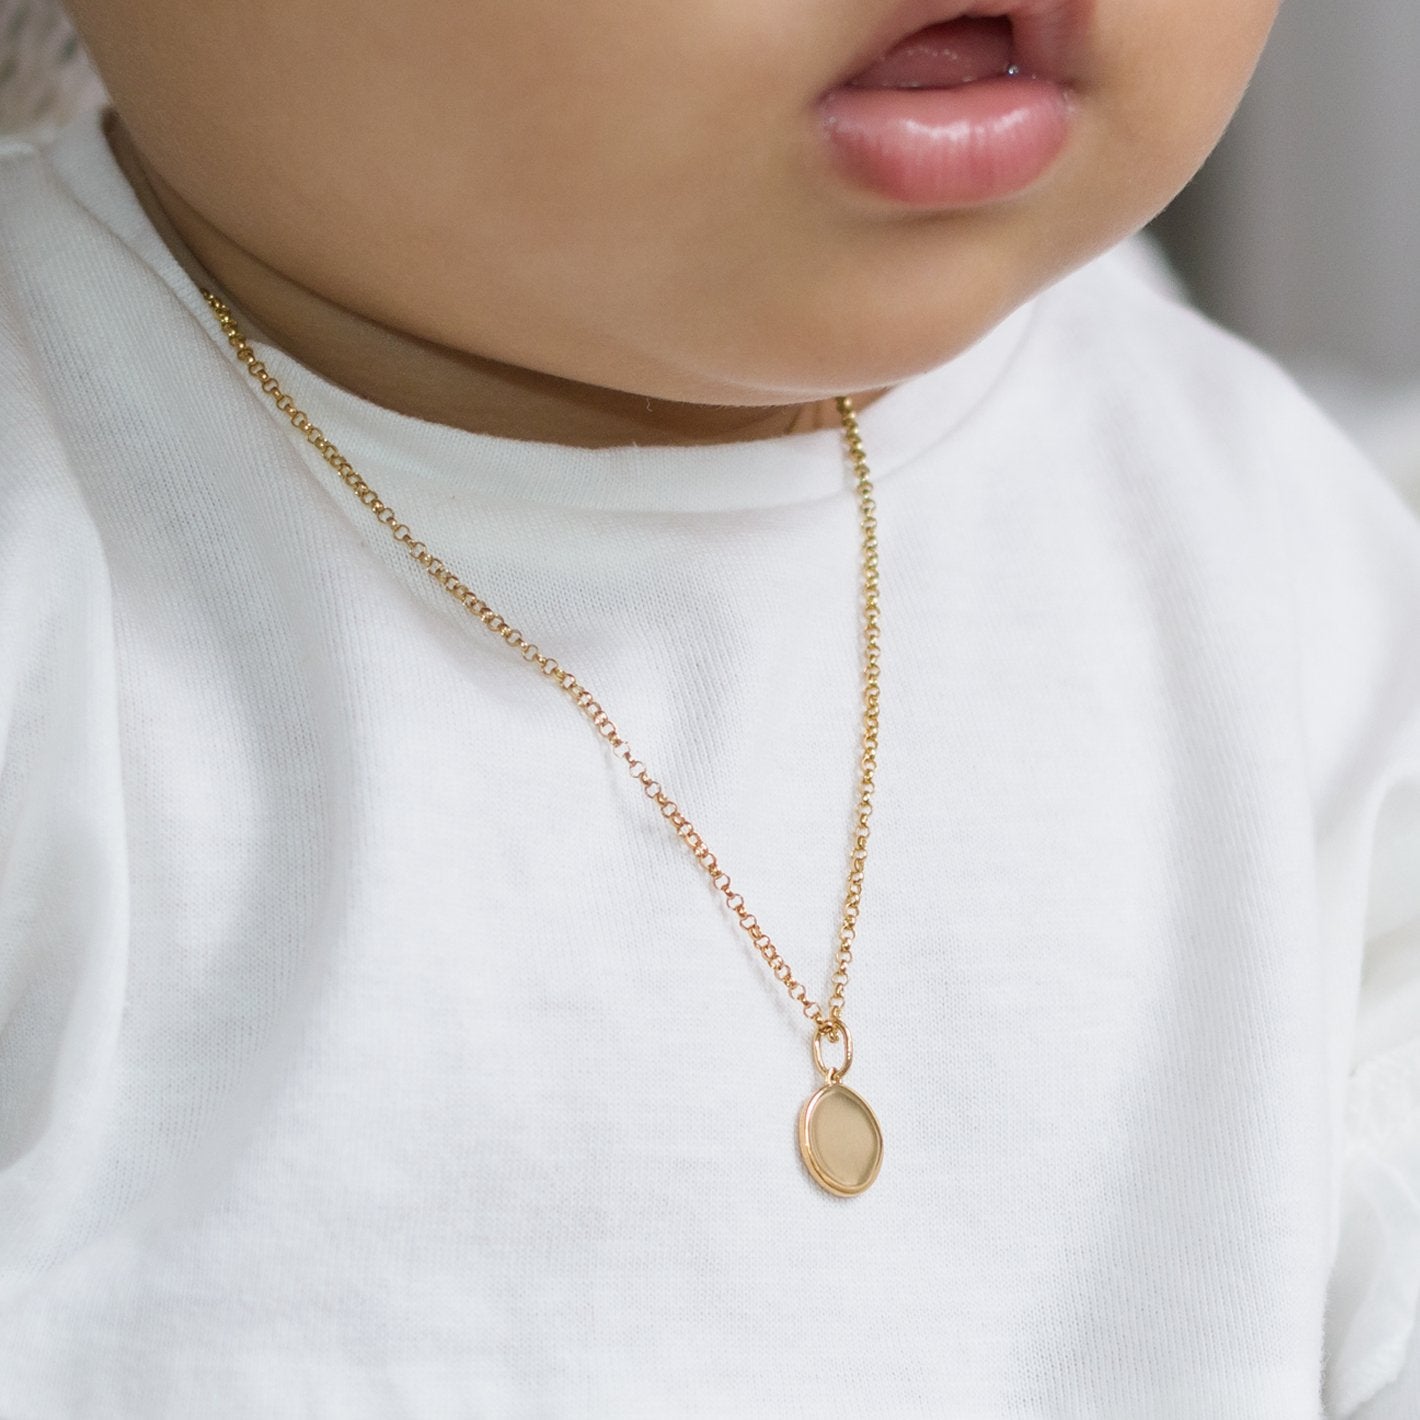 Baby Lateef Dhikr Disc Necklace